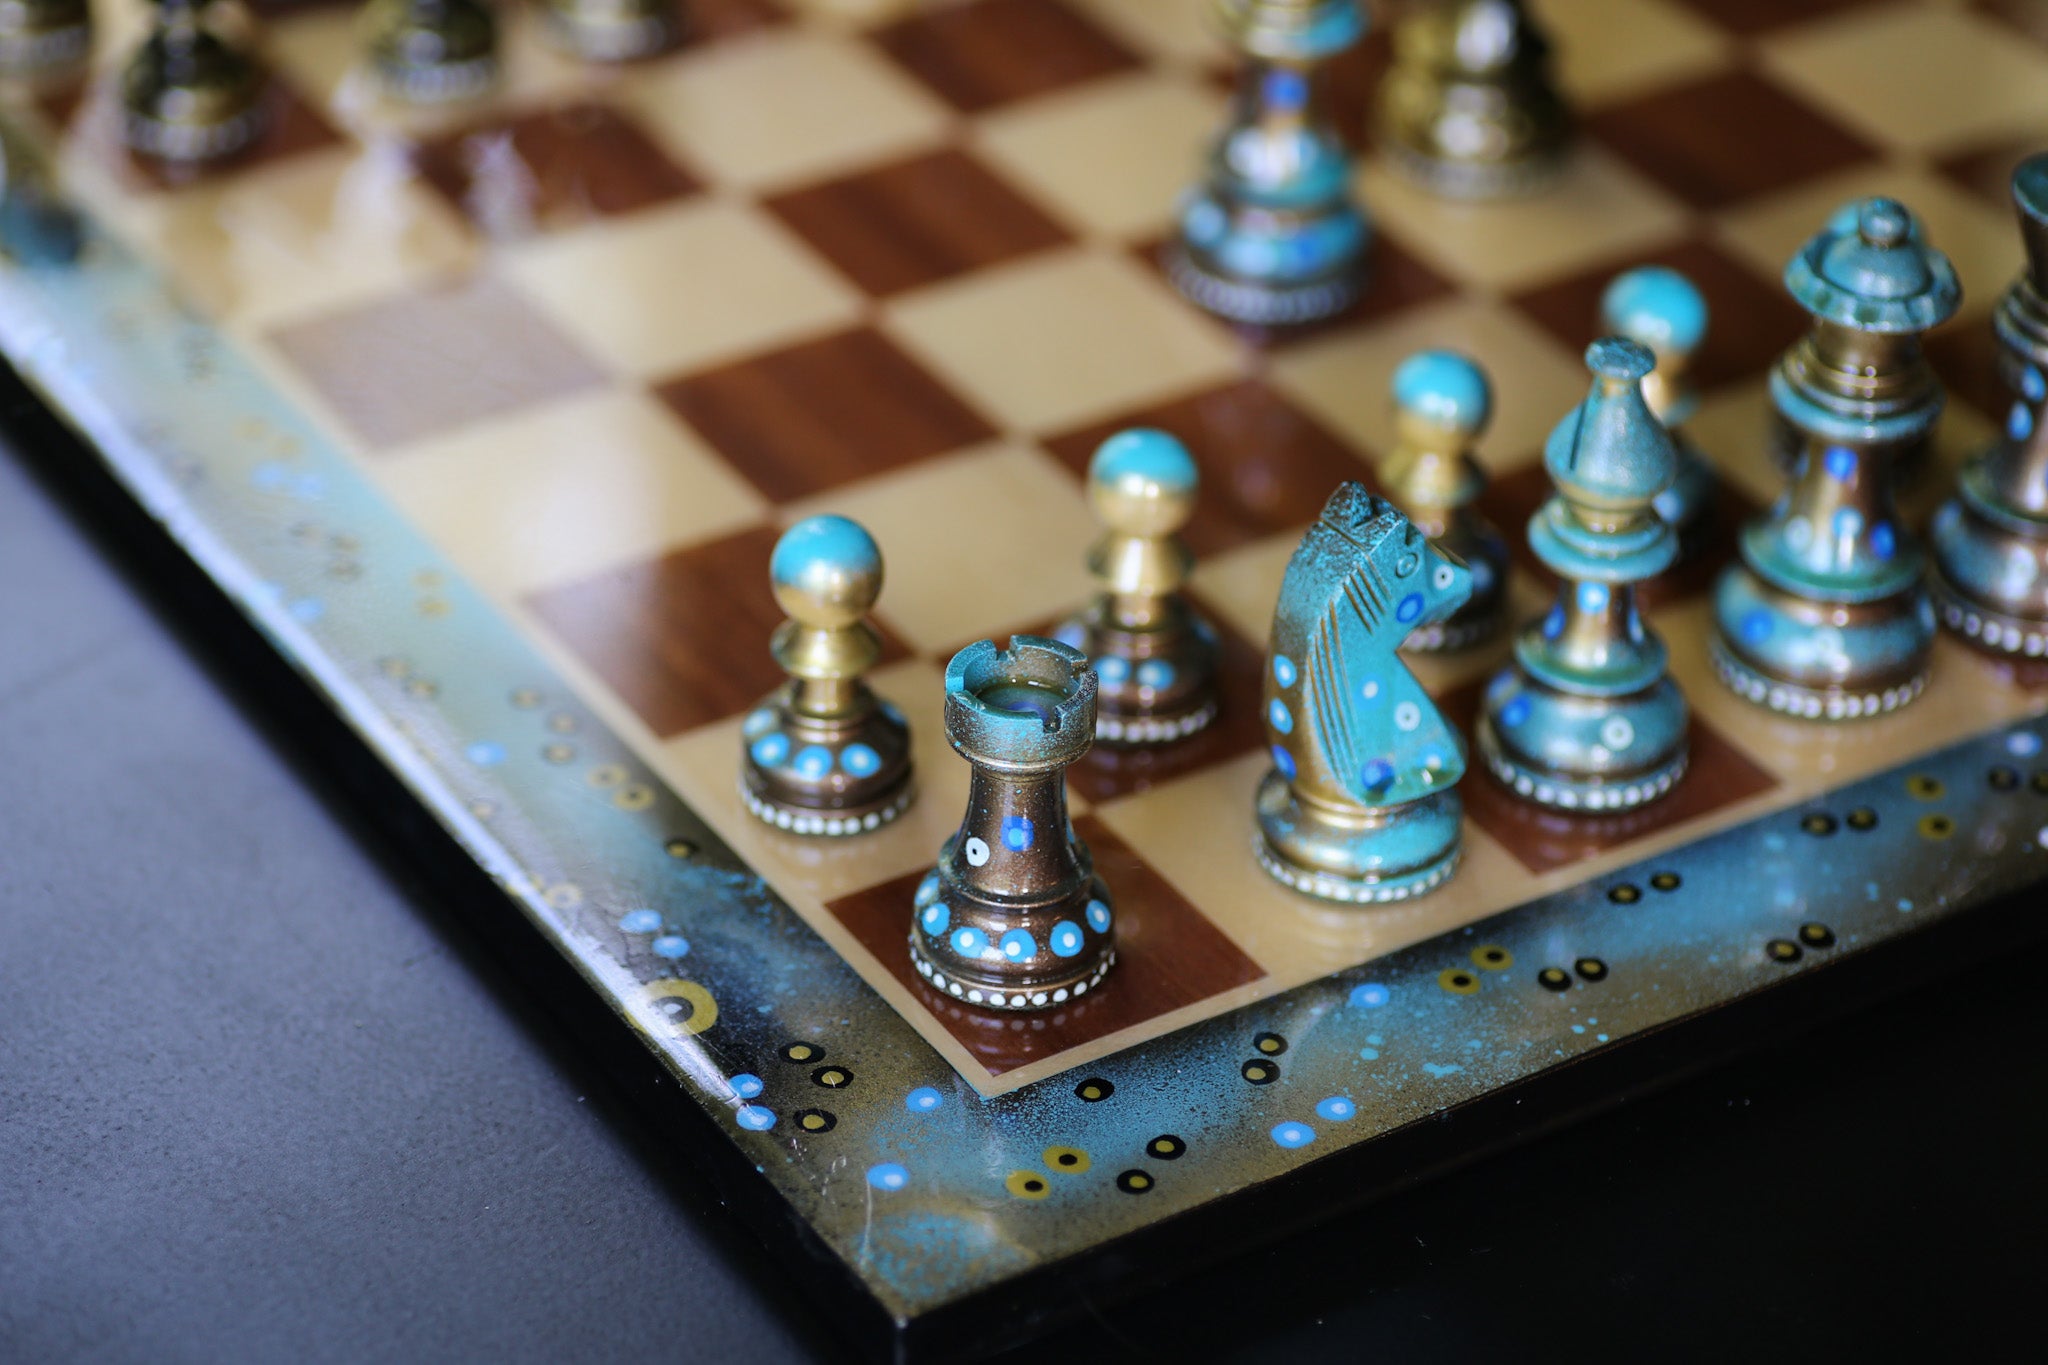 The Stoic - Sydney Gruber Painted Champions Chess Set #4 - Chess Set - Chess-House